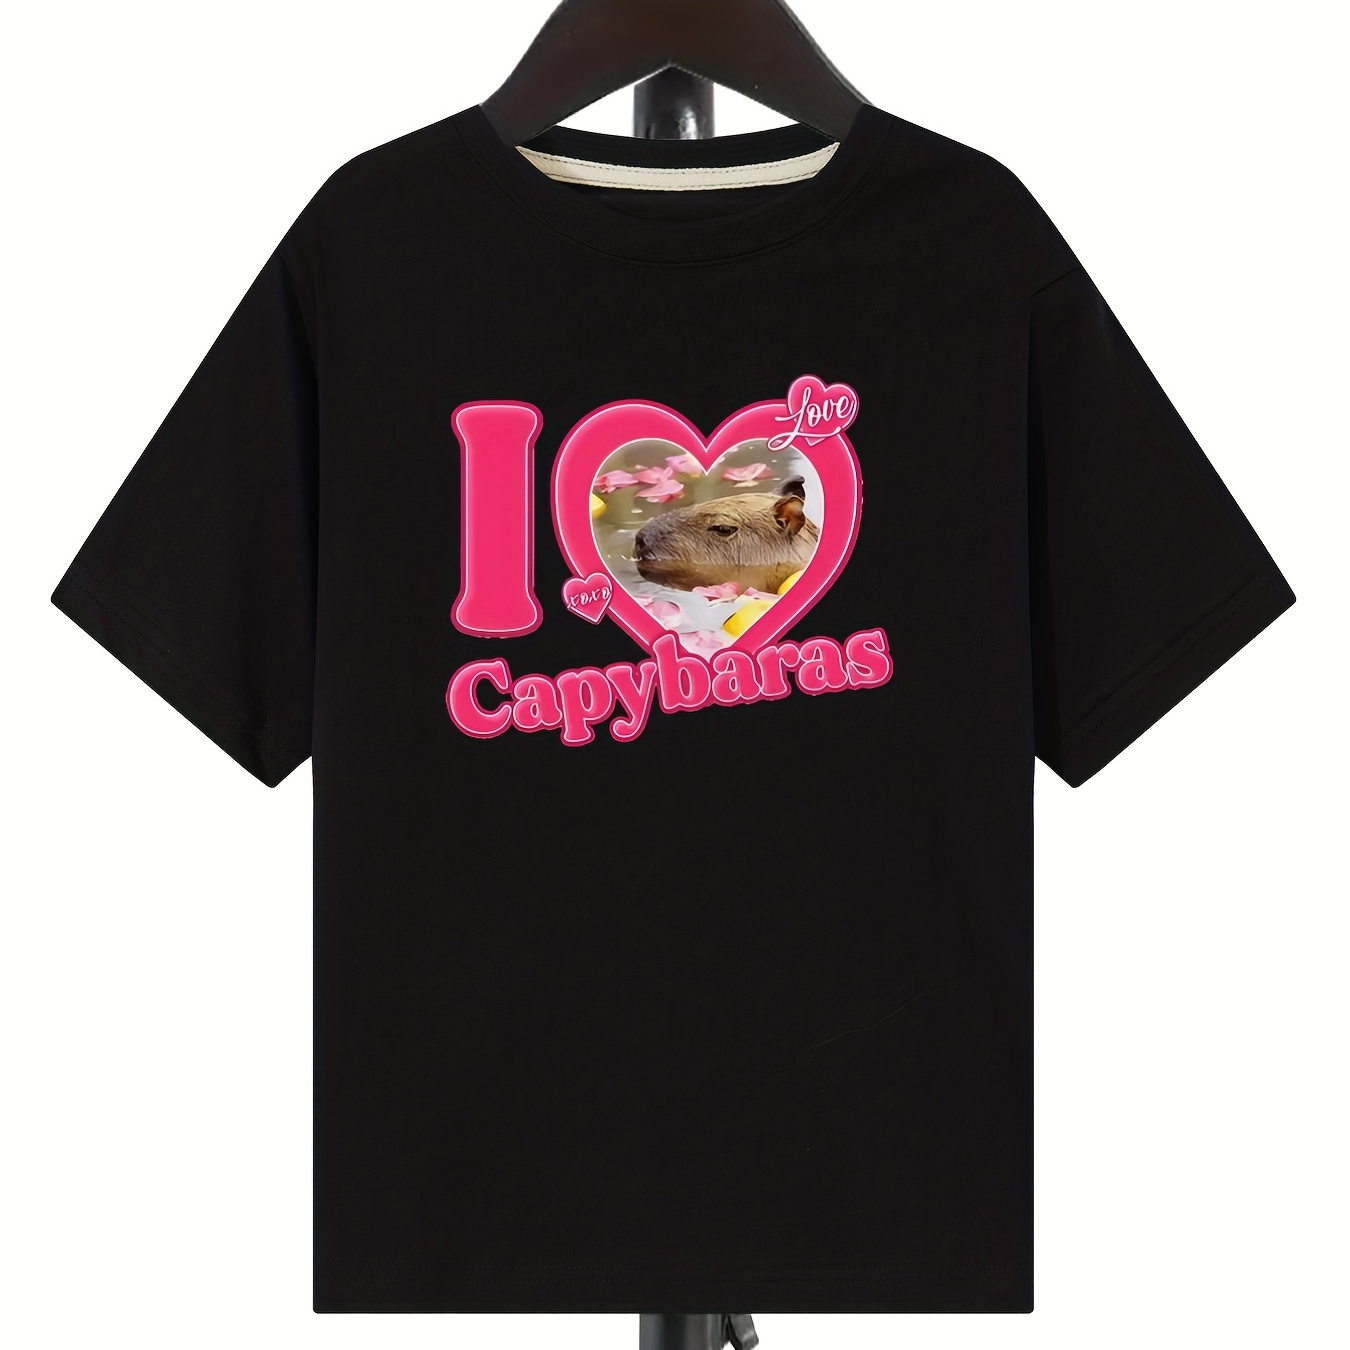 

Stylish I Love Capybaras Letter Print Boys Creative T-shirt, Casual Lightweight Comfy Short Sleeve Tee Tops, Kids Clothings For Summer